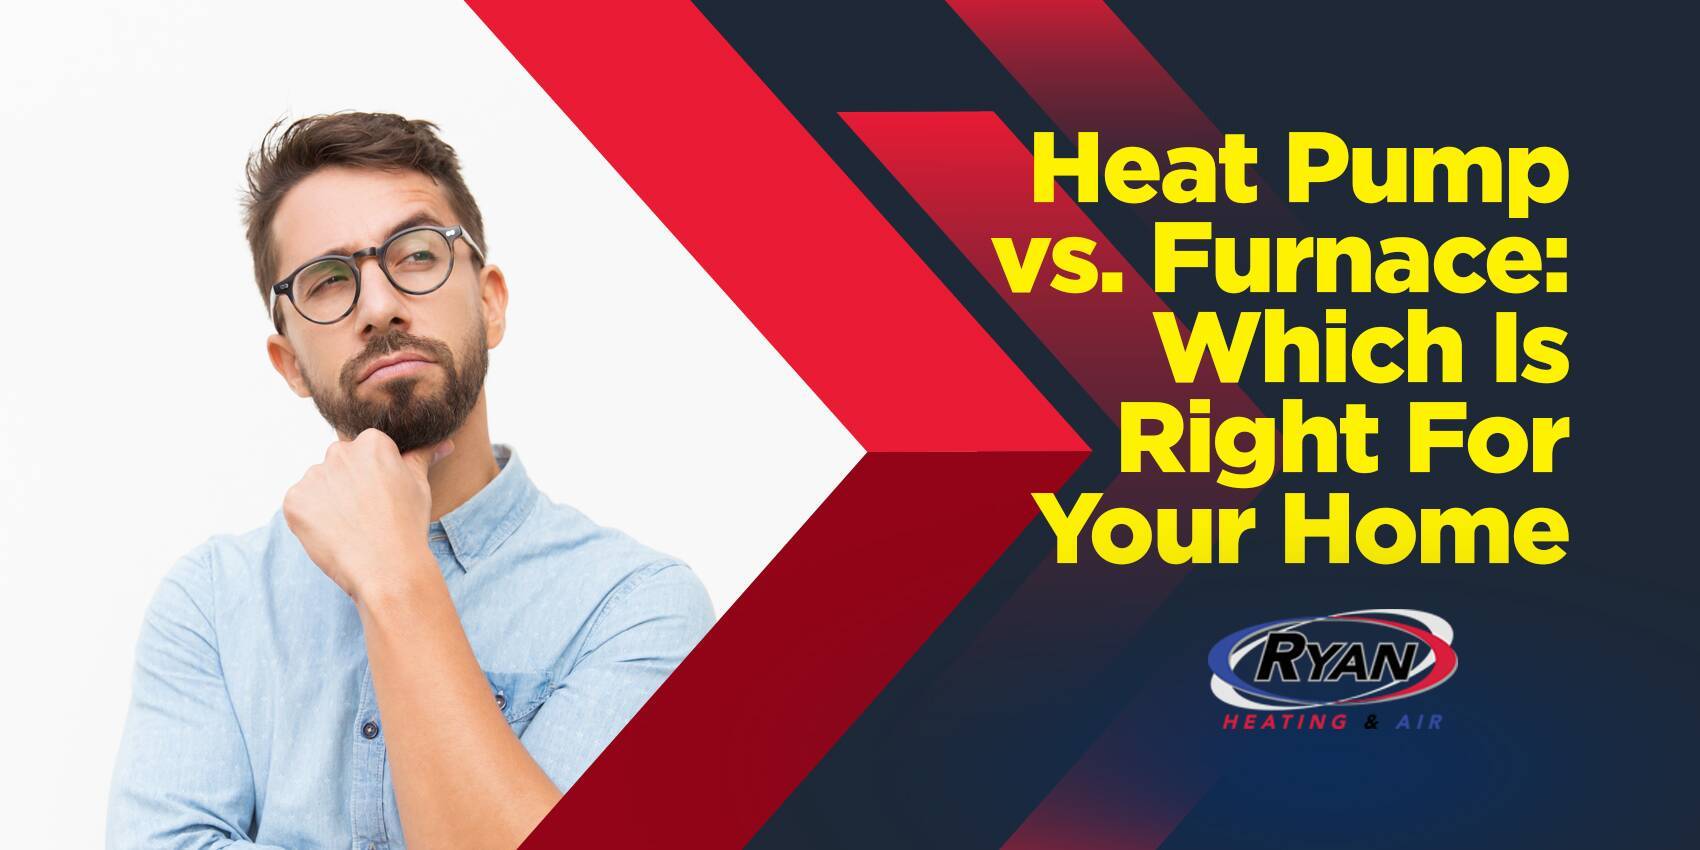 Heat Pump vs. Furnace: Which Is Right For Your Home